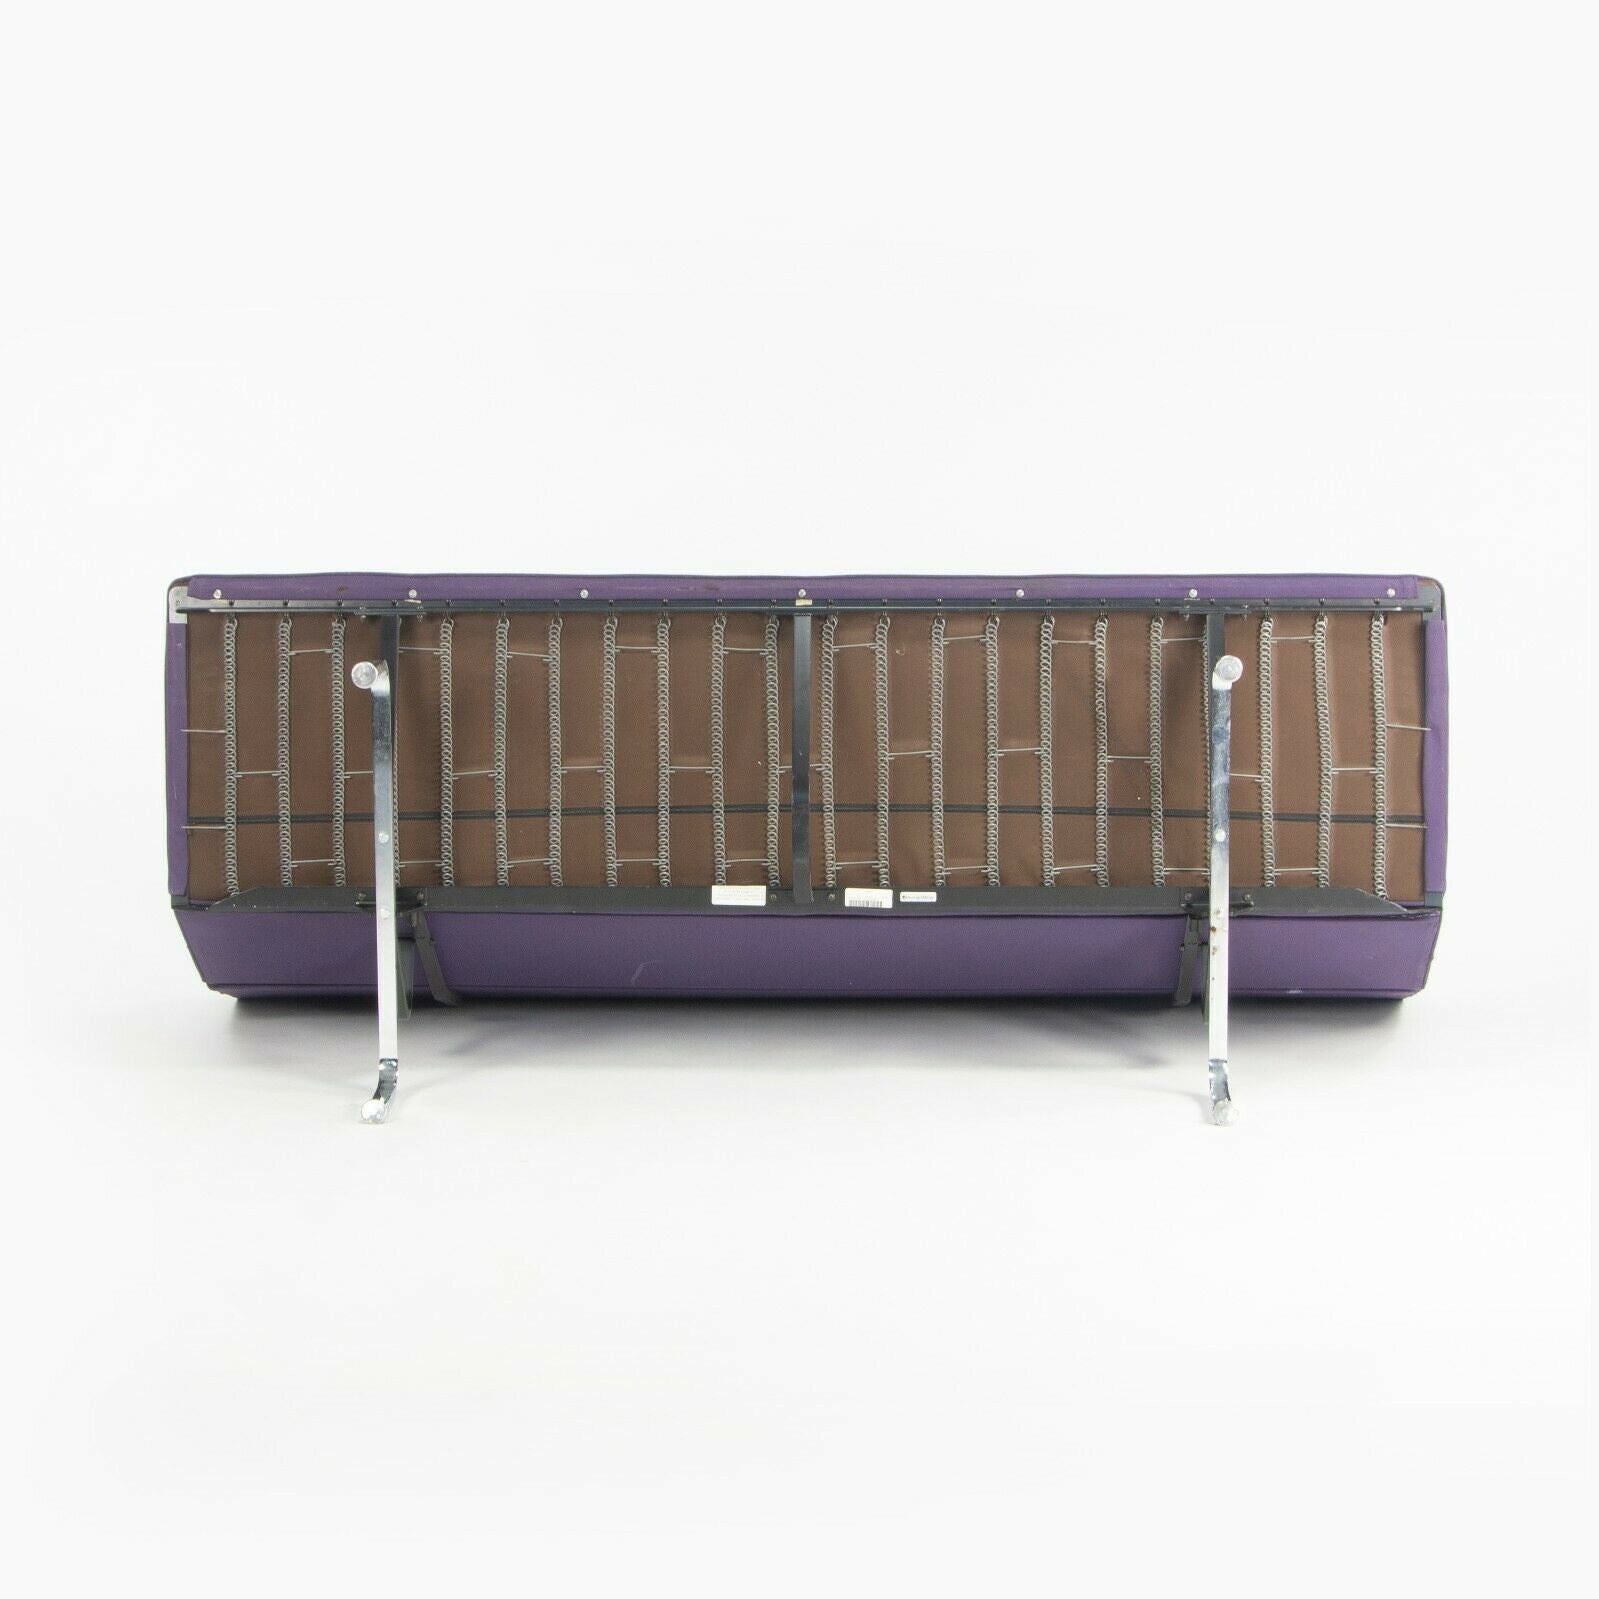 2006 Herman Miller Ray and Charles Eames Sofa Compact Purple Fabric Upholstery